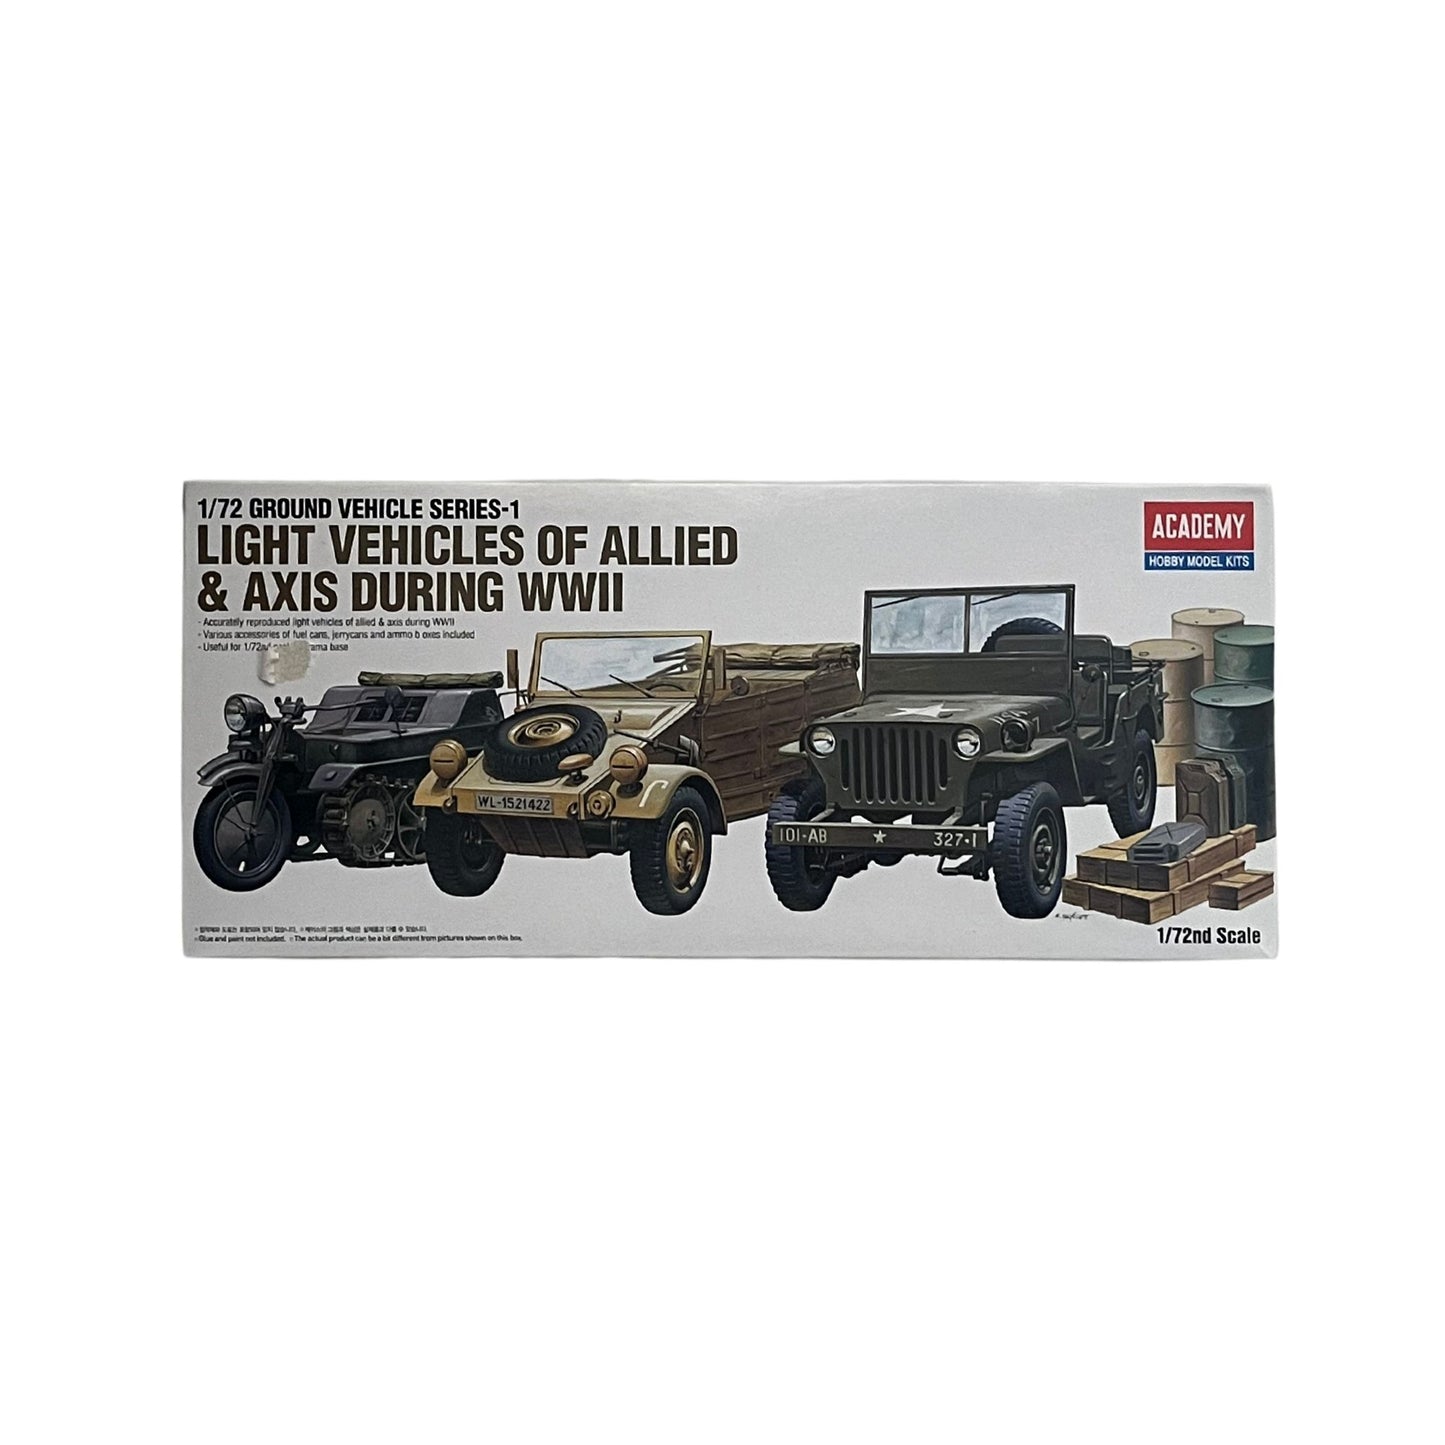 Academy model kit Light Vehicles of Allied & Axis during WWII 1:72